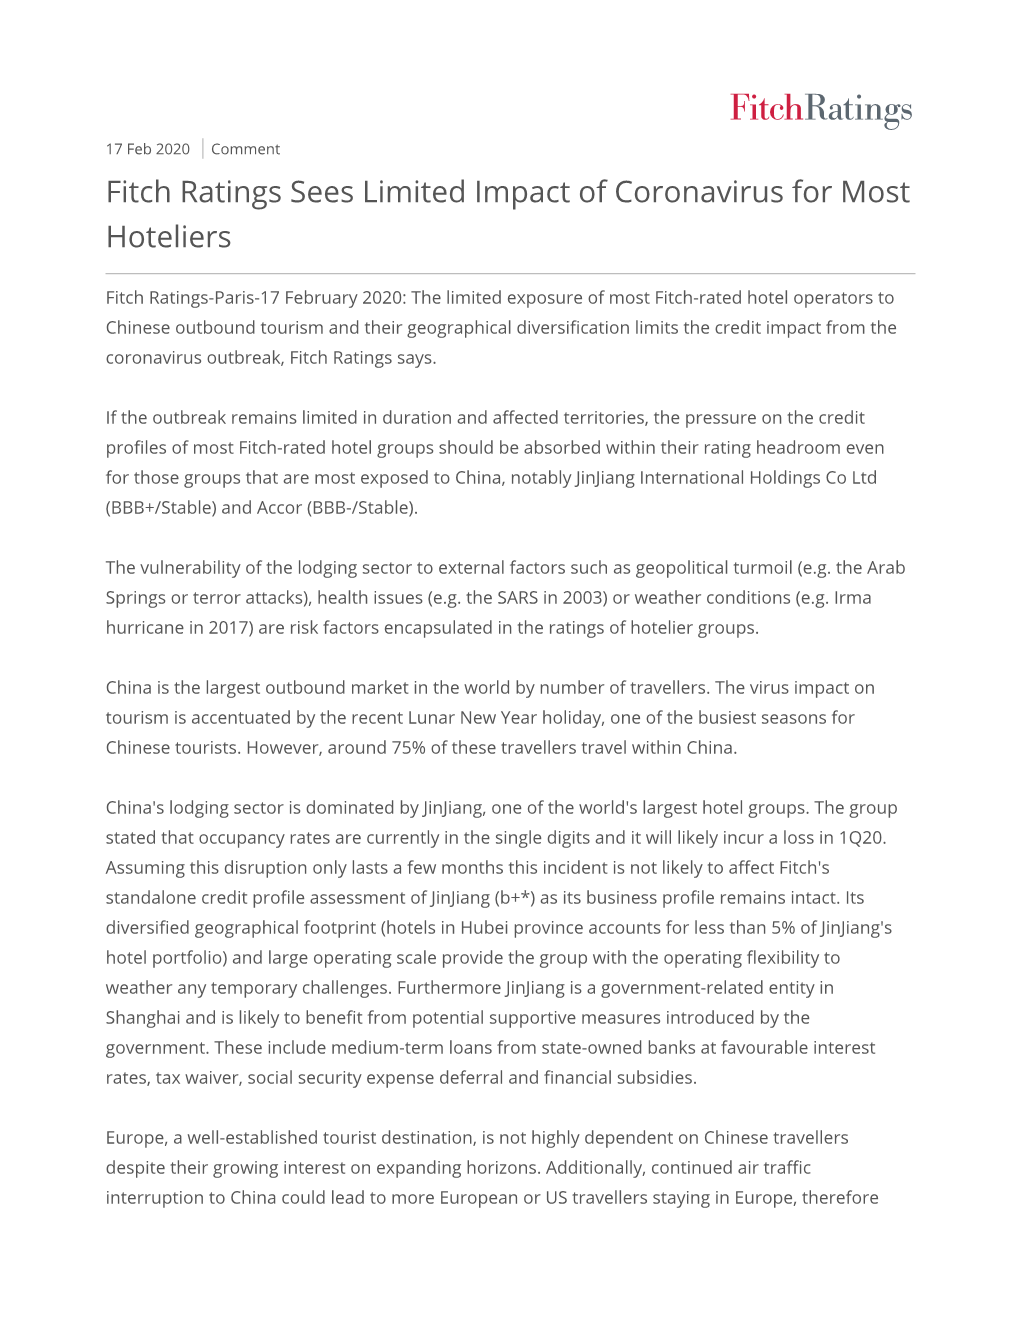 Fitch Ratings Sees Limited Impact of Coronavirus for Most Hoteliers